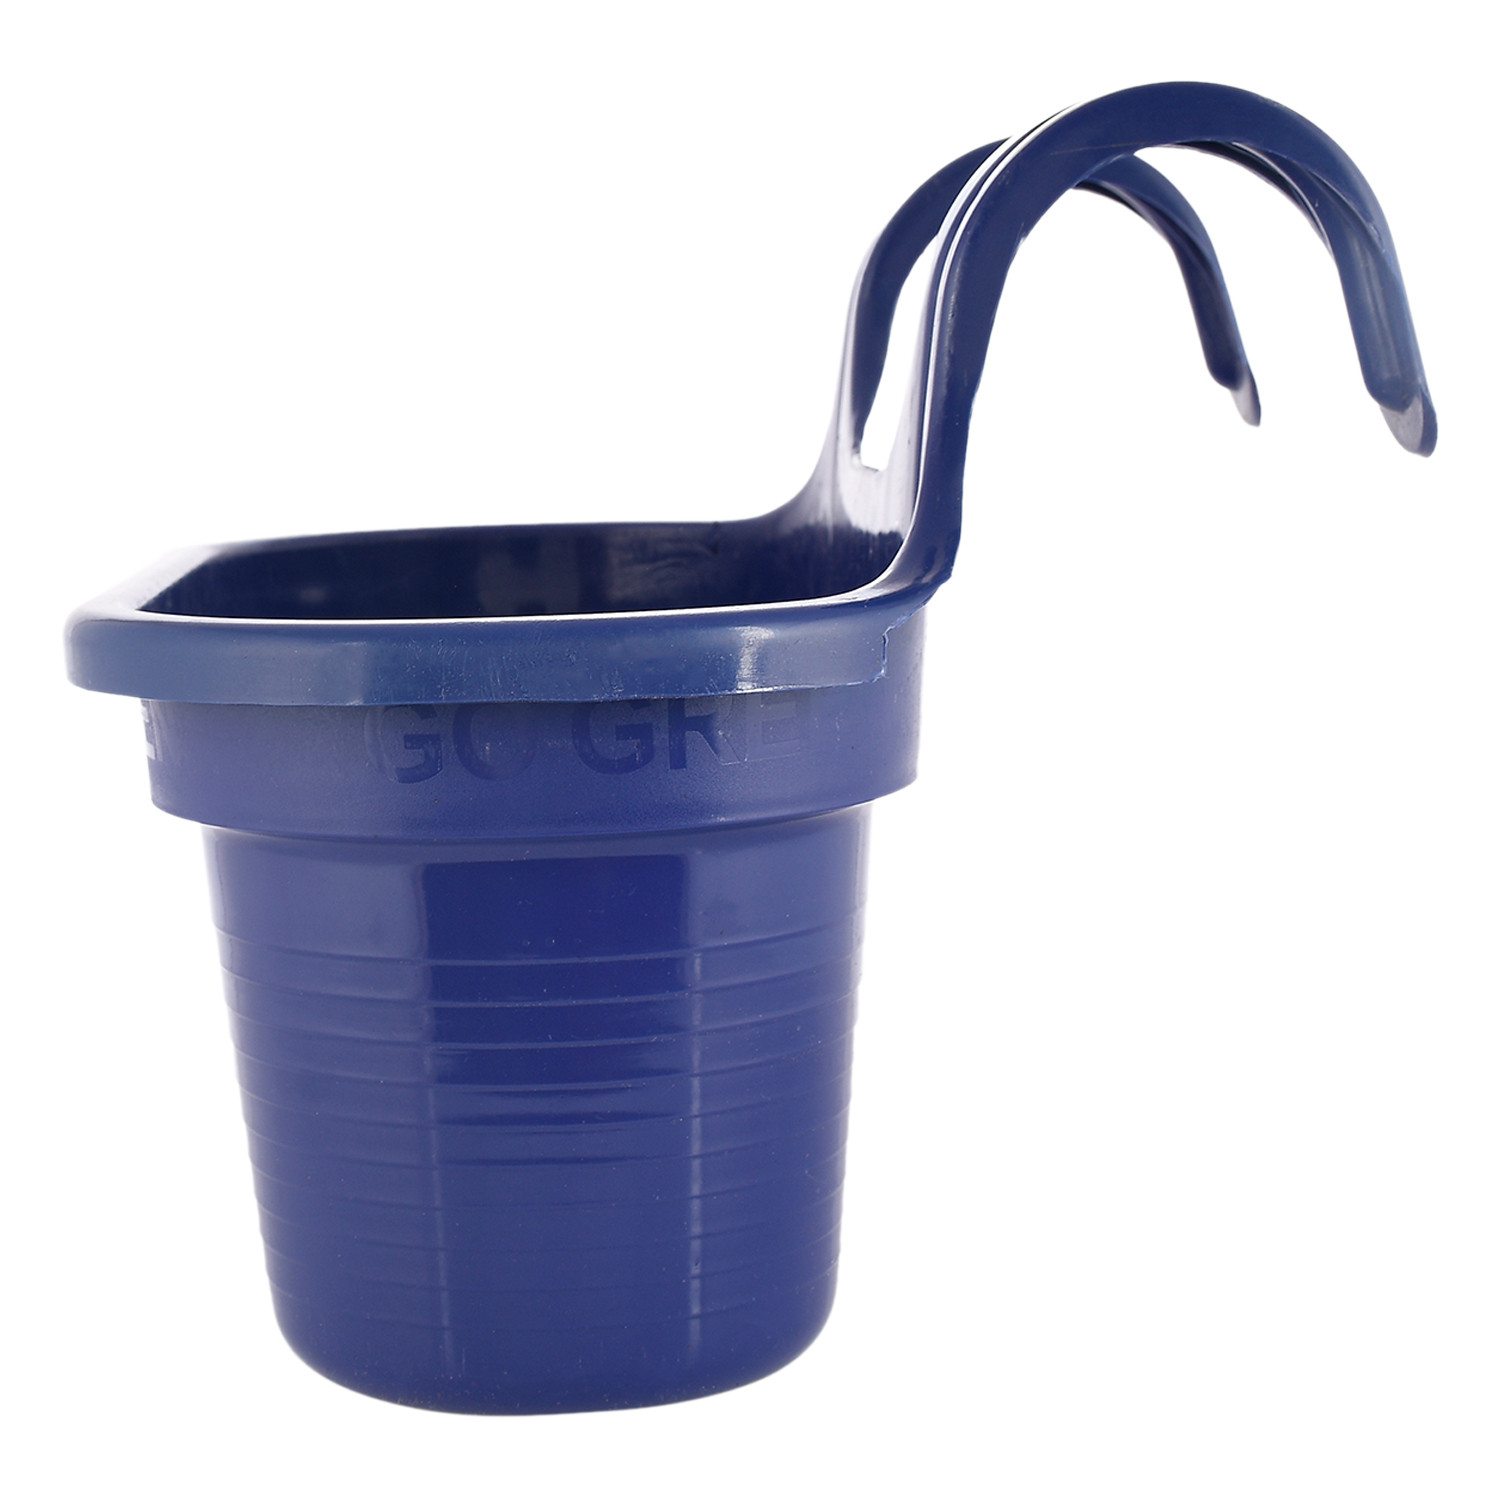 Kuber Industries Hanging Flower Pot|Double Hook Plant Container|Durable Plastic Glossy Finish Pots for Home|Balcony|Garden|12 Inch|Pack of 2 (Blue & Red)